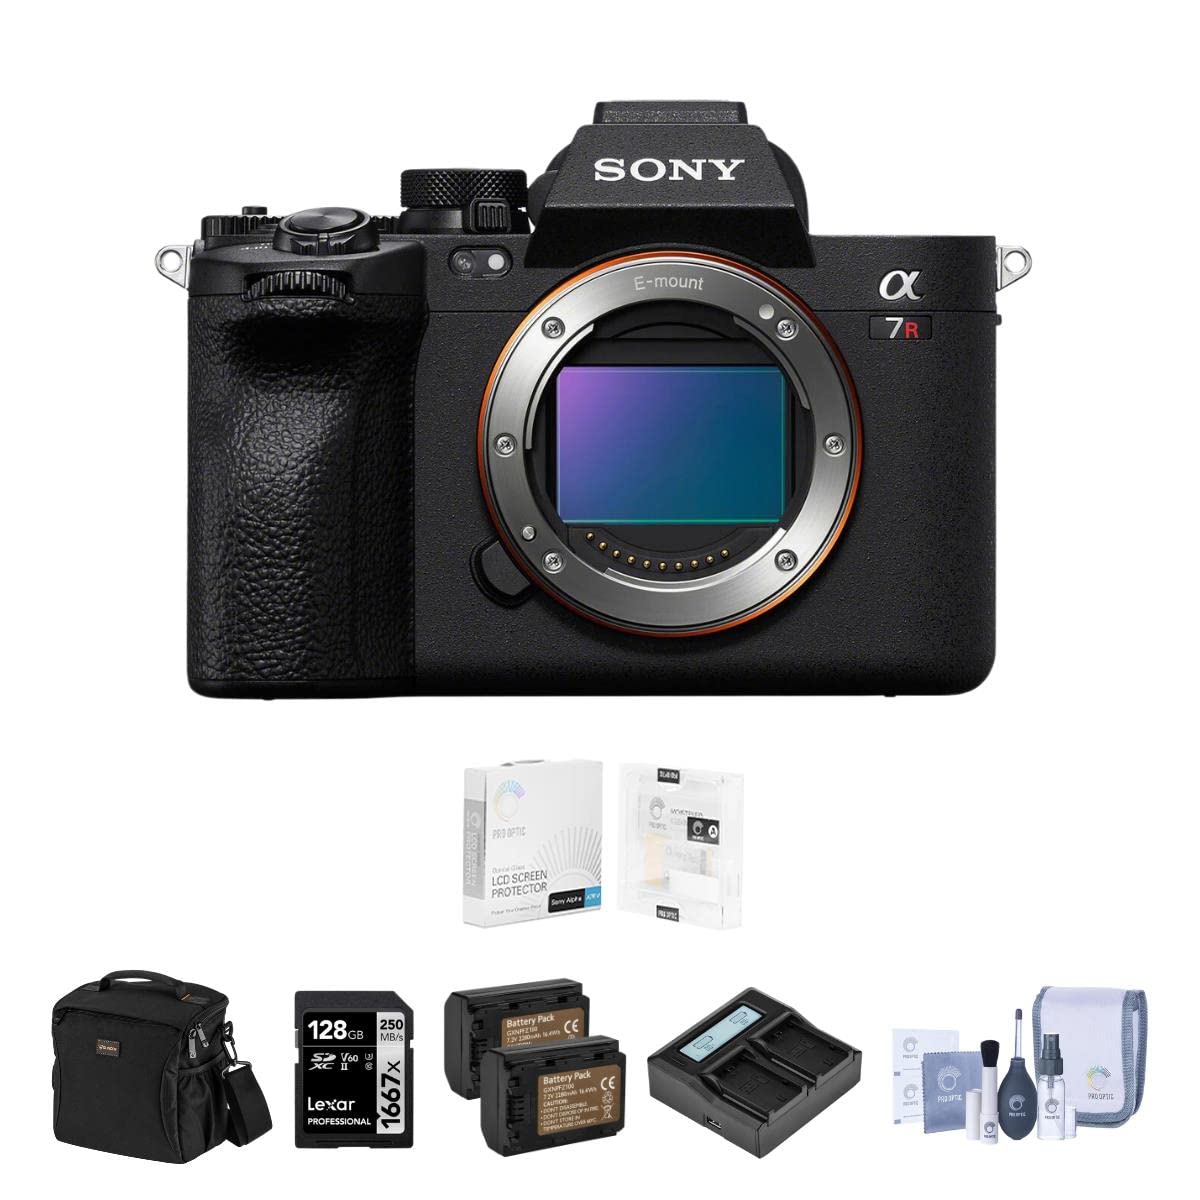 Sony Alpha a7R V Mirrorless Digital Camera Body Bundle with 128GB SD Card, Shoulder Bag, 2X Battery, Dual Charger, Screen Protector, Cleaning Kit